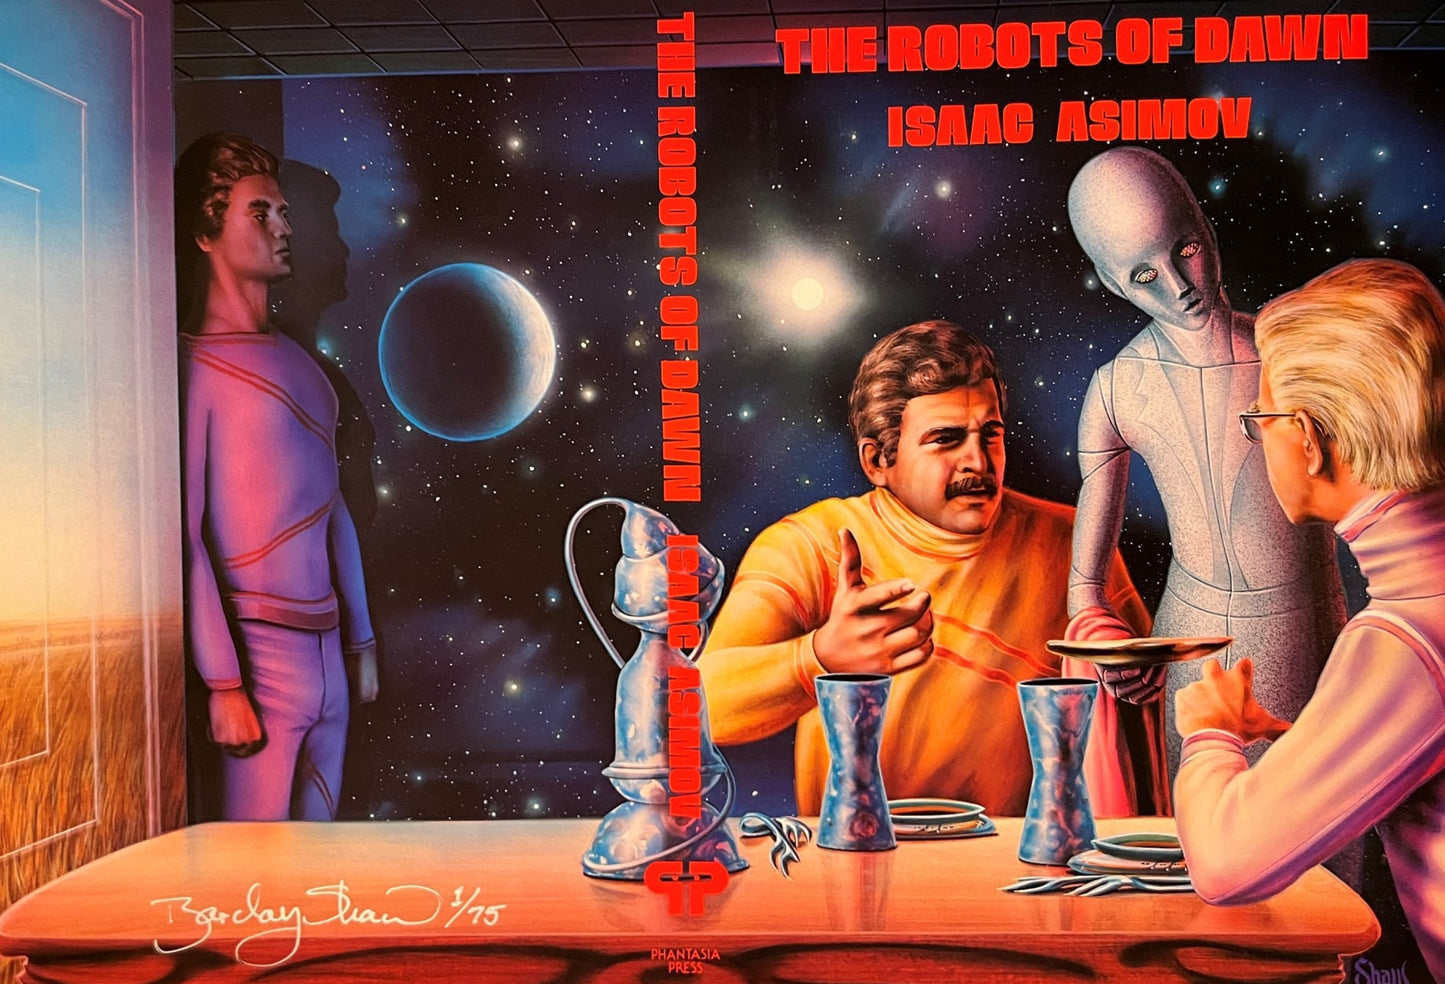 Robots of Dawn by Isaac Asimov - dust jacket only: 2 variants